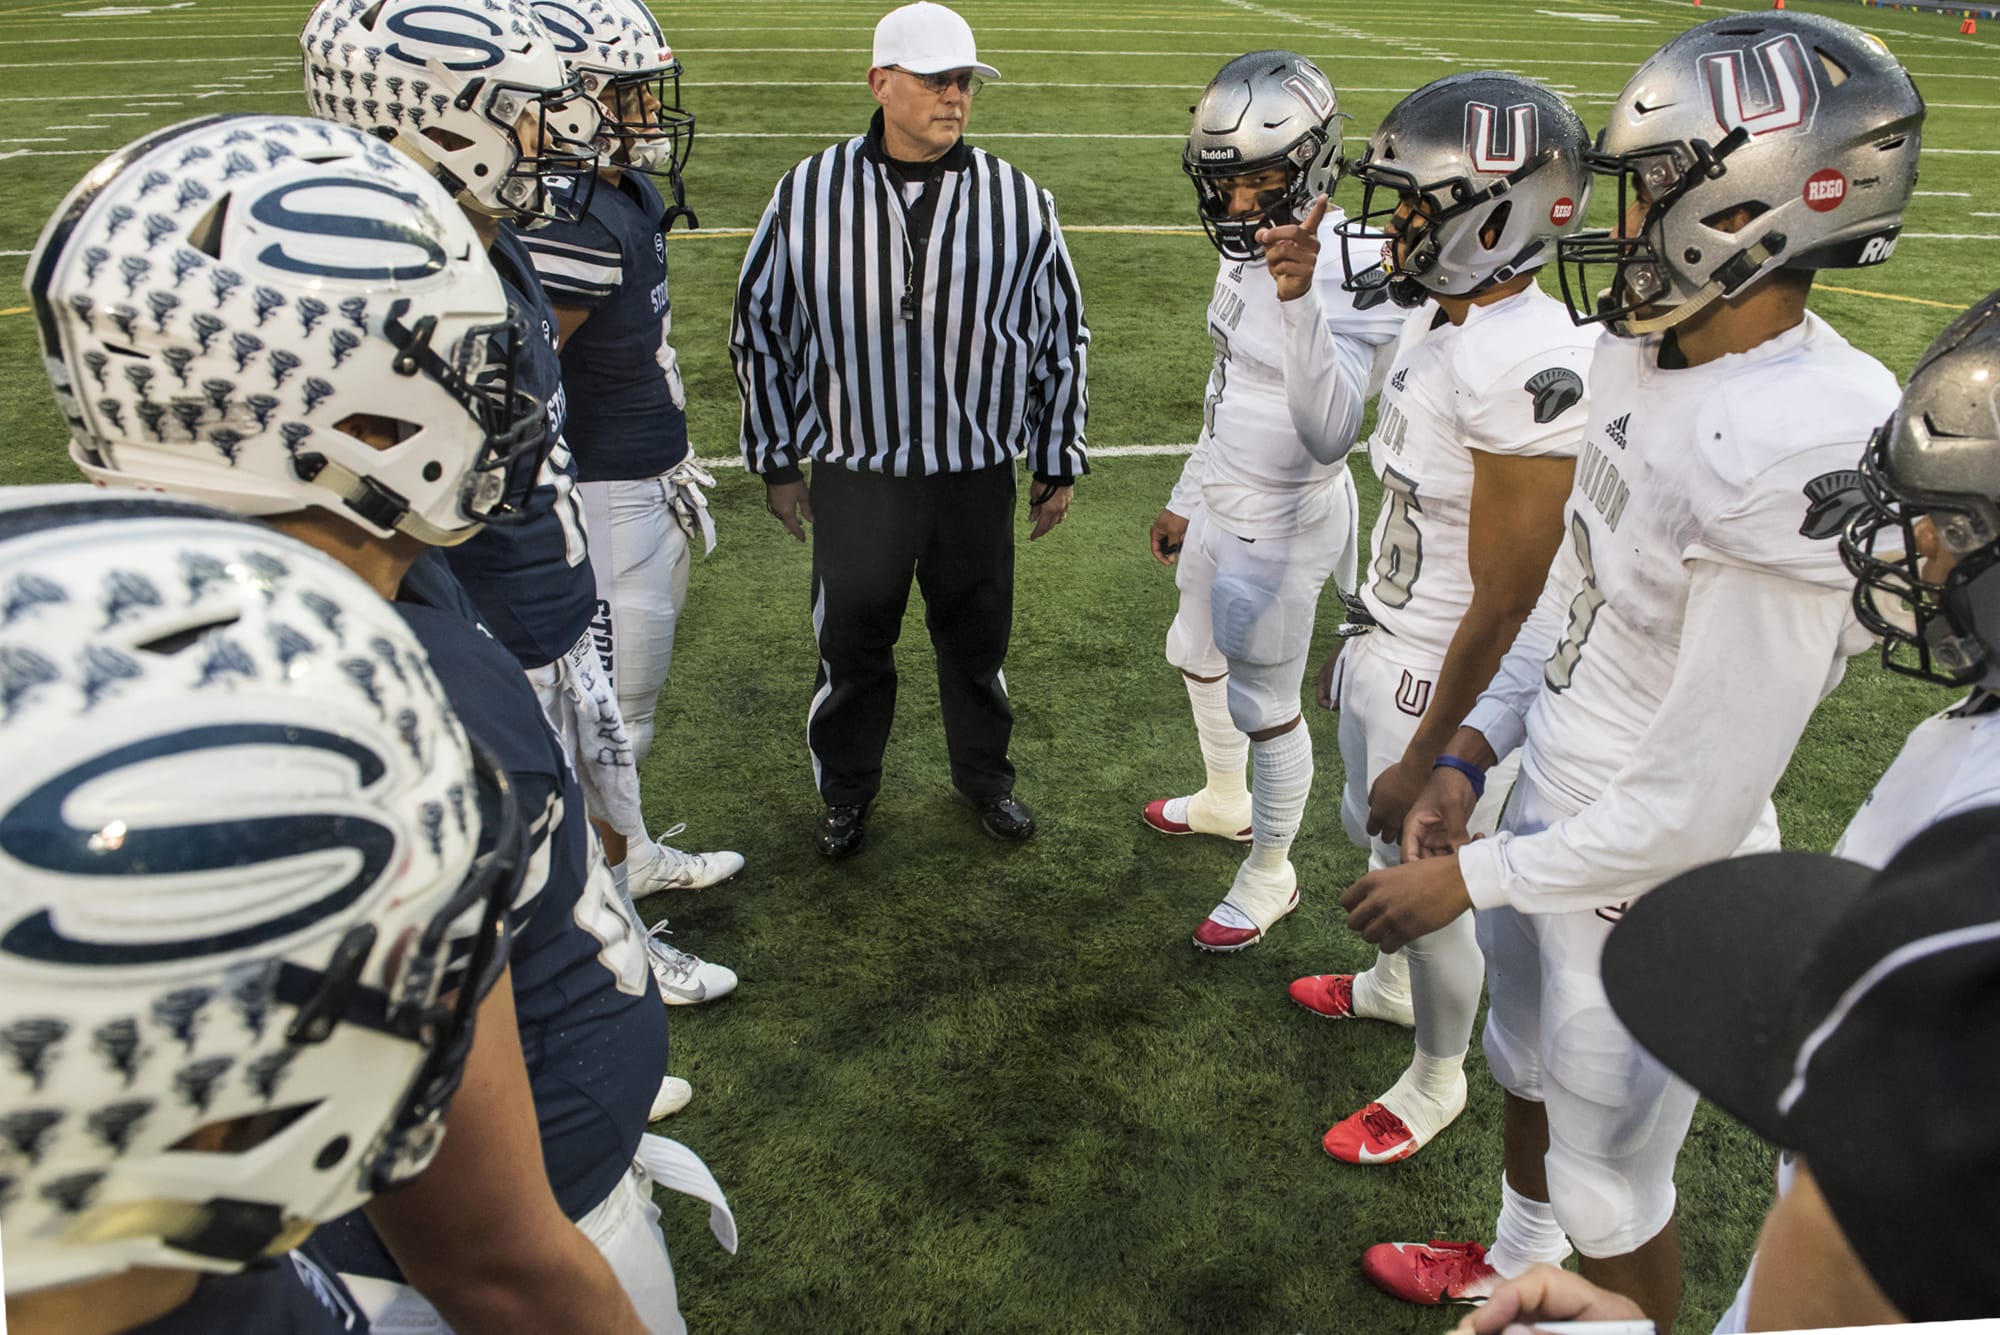 Union's Lincoln Victor, center right, choses the team's defending goal following the coin toss against Skyview at the Kiggins Bowl on Friday night, Oct.